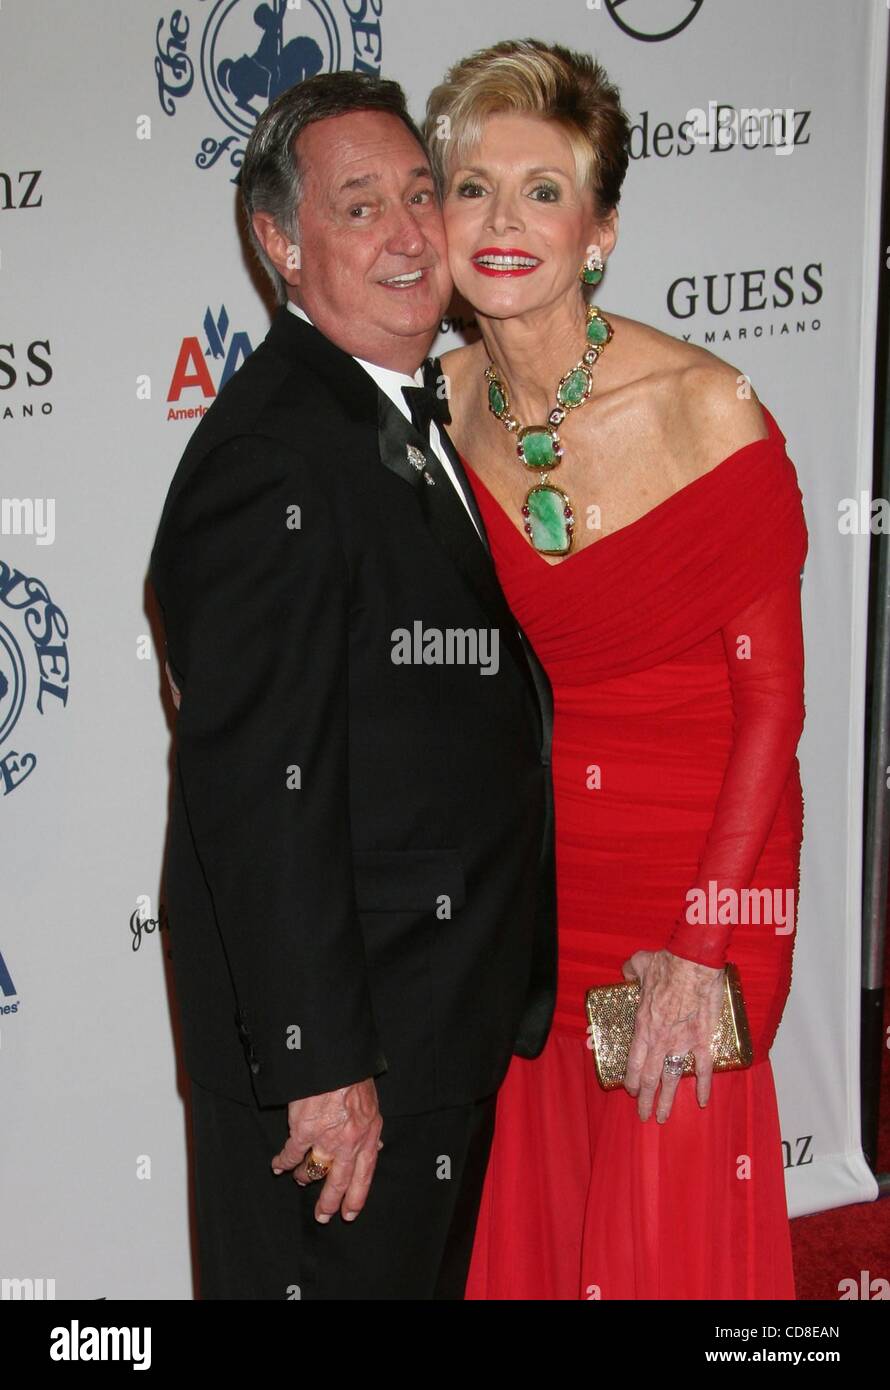 Oct 25, 2008 - Los Angeles, California, USA - Singer NEIL SEDAKA and wife LEBA STRASSBERG   at The Mercedes-Benz 30th Anniversary Carousel of Hope Ball to benefit The Barbara Davis Center for Childhood Diabetes. The event was held at the Beverly Hilton Hotel. (Credit Image: Â© Paul Fenton/ZUMA Press Stock Photo